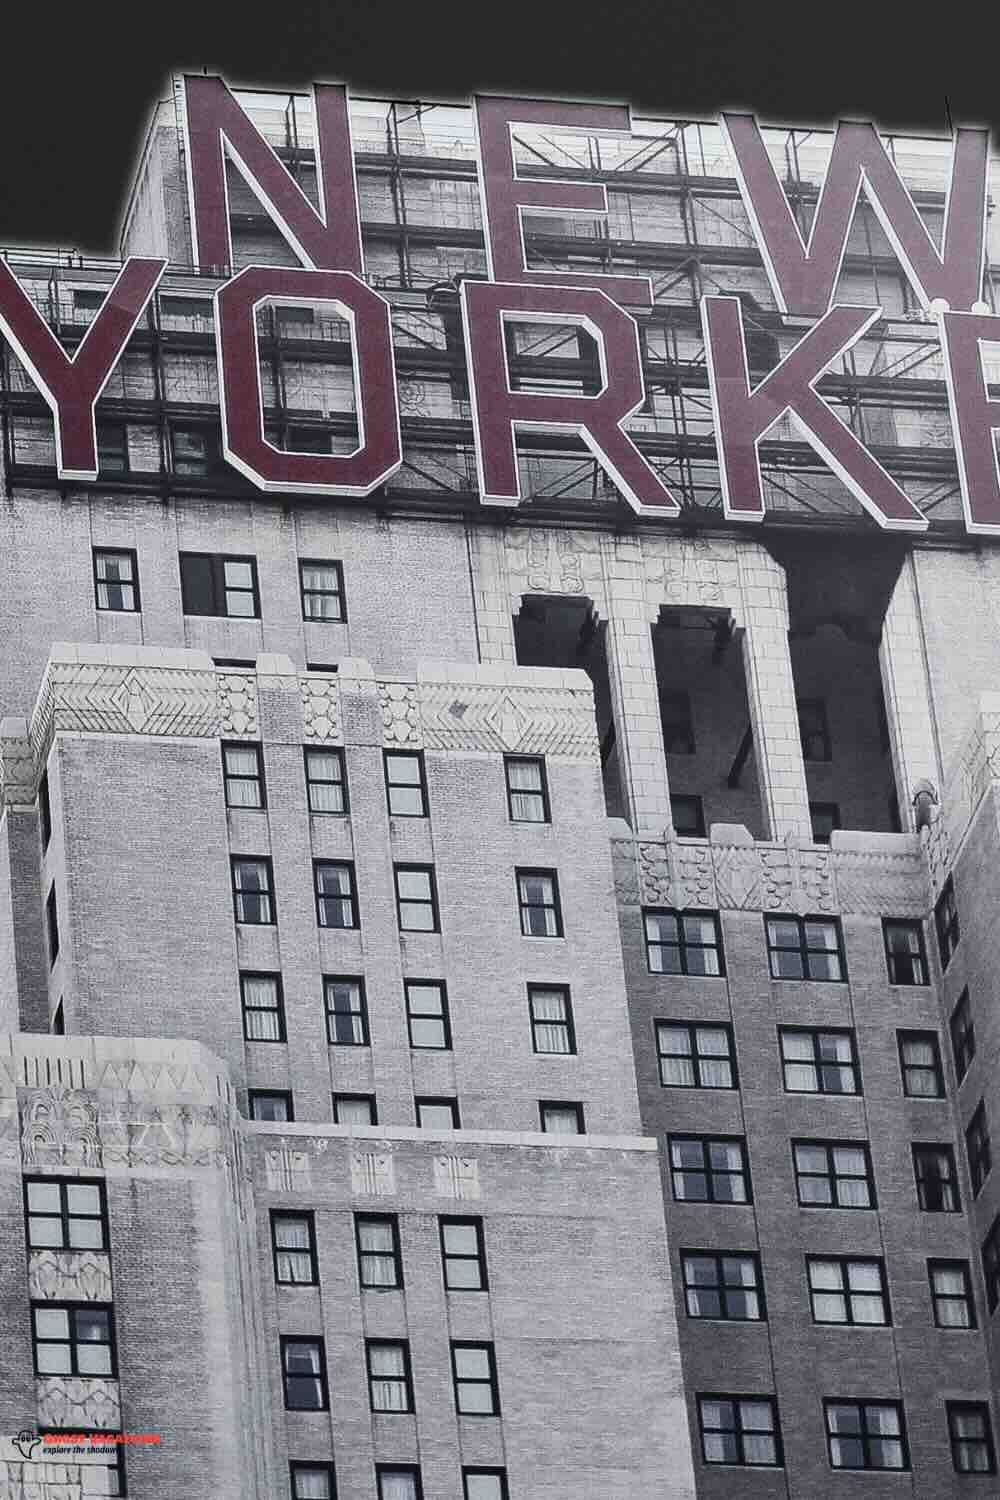 "The New Yorker Hotel, a prominent site among haunted hotels in New York City, famous for its spooky legends and ghostly sightings."